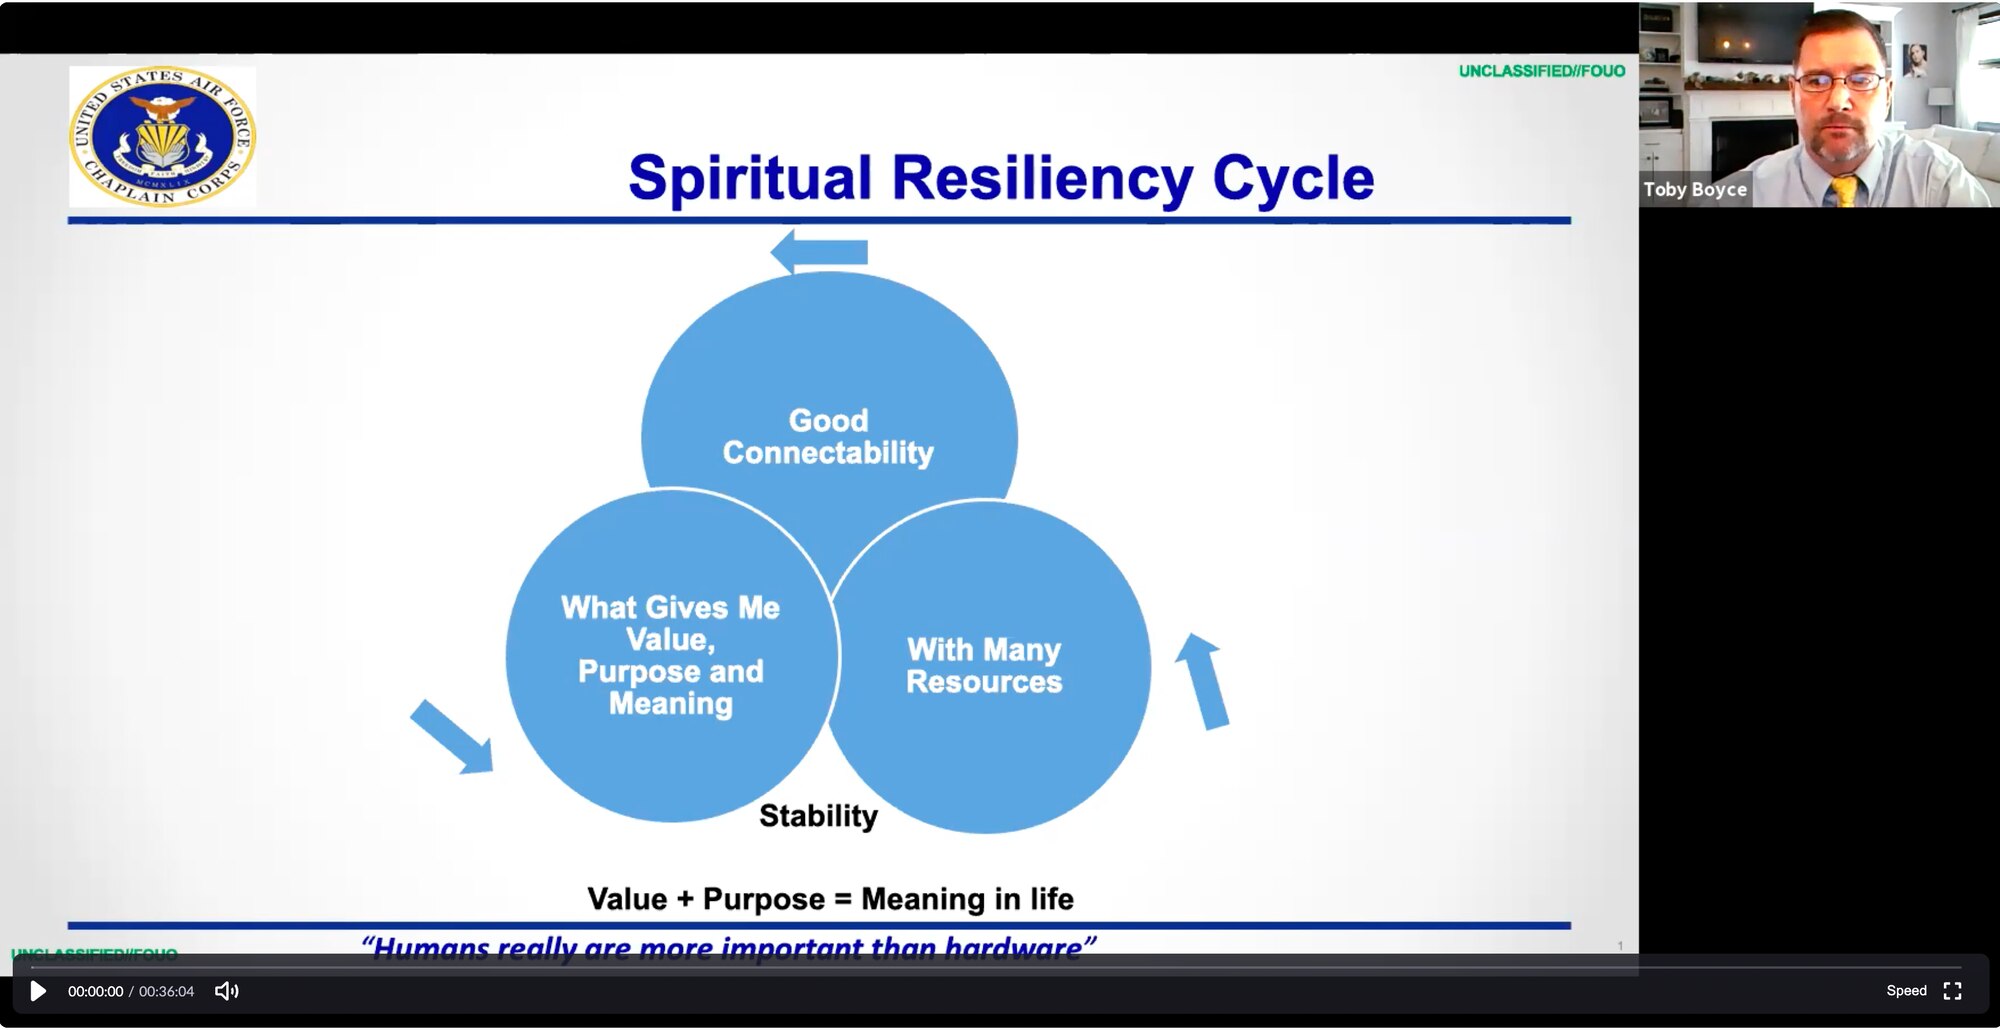 Mr. Toby Boyce, Director of AFSOC’s Integrated Resilience Optimization Network, speaks about the Spiritual Resiliency Cycle during AFSOC's Virtual Resilience Summit Sept. 28, 2021. The summit was held as a platform to address a range of emotions relating to personal and unfolding current world events. (Courtesy photo)